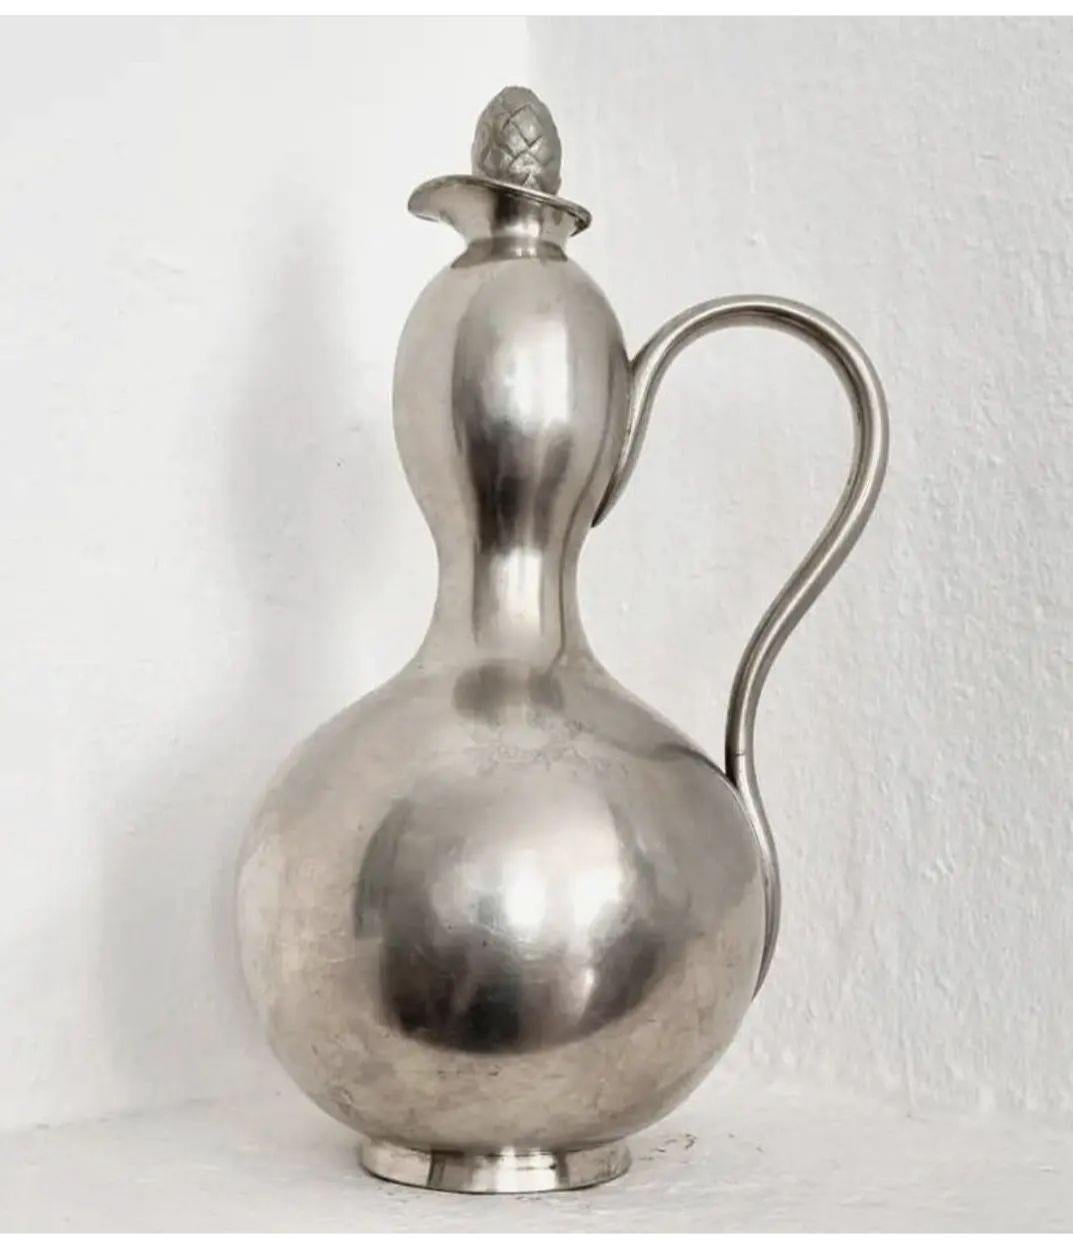 Rare wine pitcher in pewter, gourd-shaped and pine cone-shaped cap. Made by Herman Bergman Konstgjuteri, Stockholm. Stockholm and the makers hallmark, dated 1931 (E8)

In nice condition, normal wear and signs of age. One shallow dent - seen in